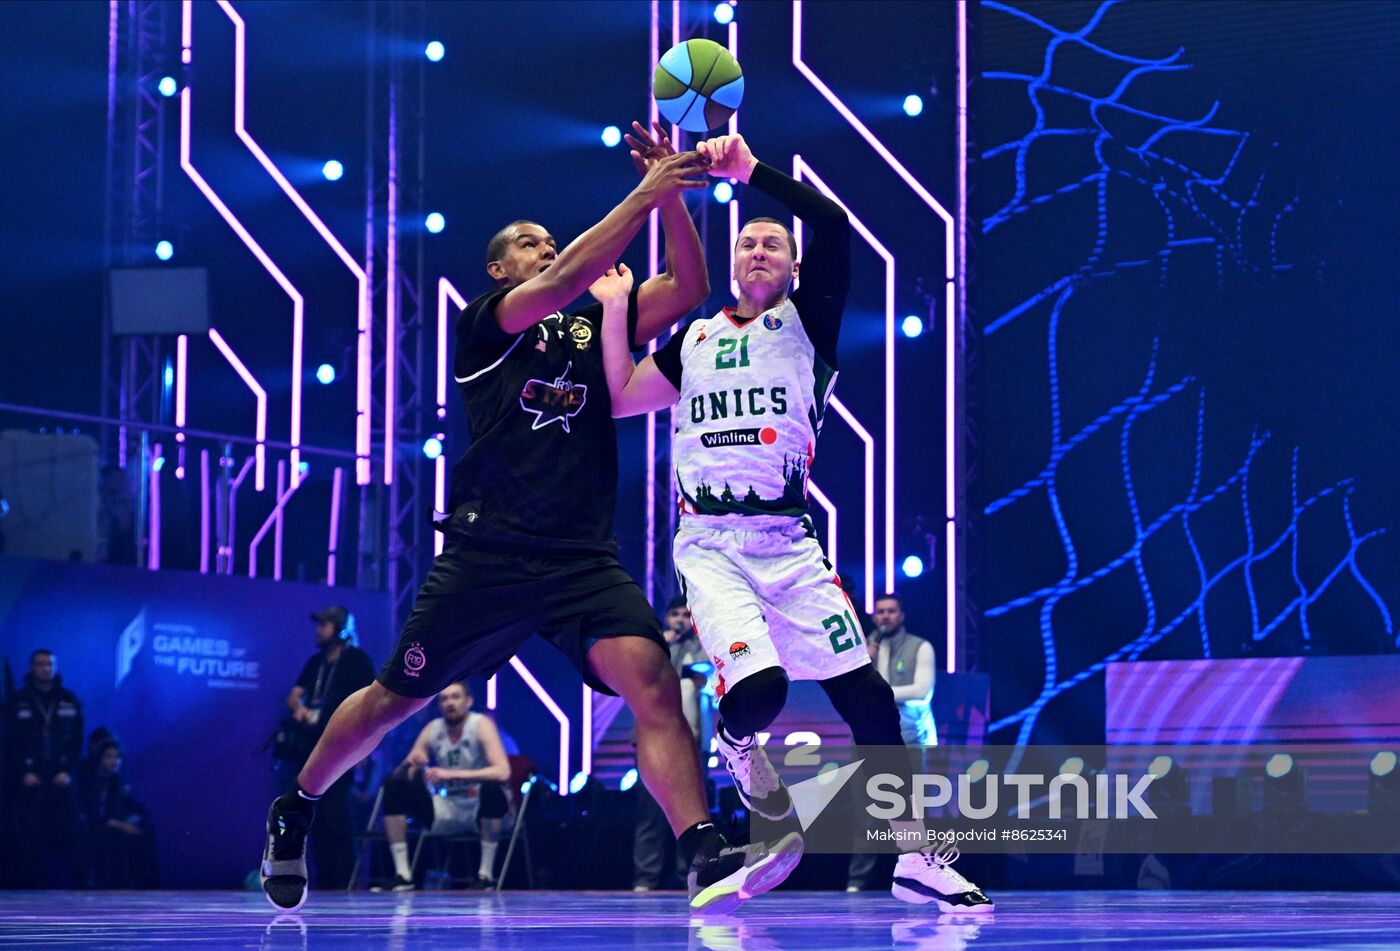 Russia Games of Future Phygital Basketball